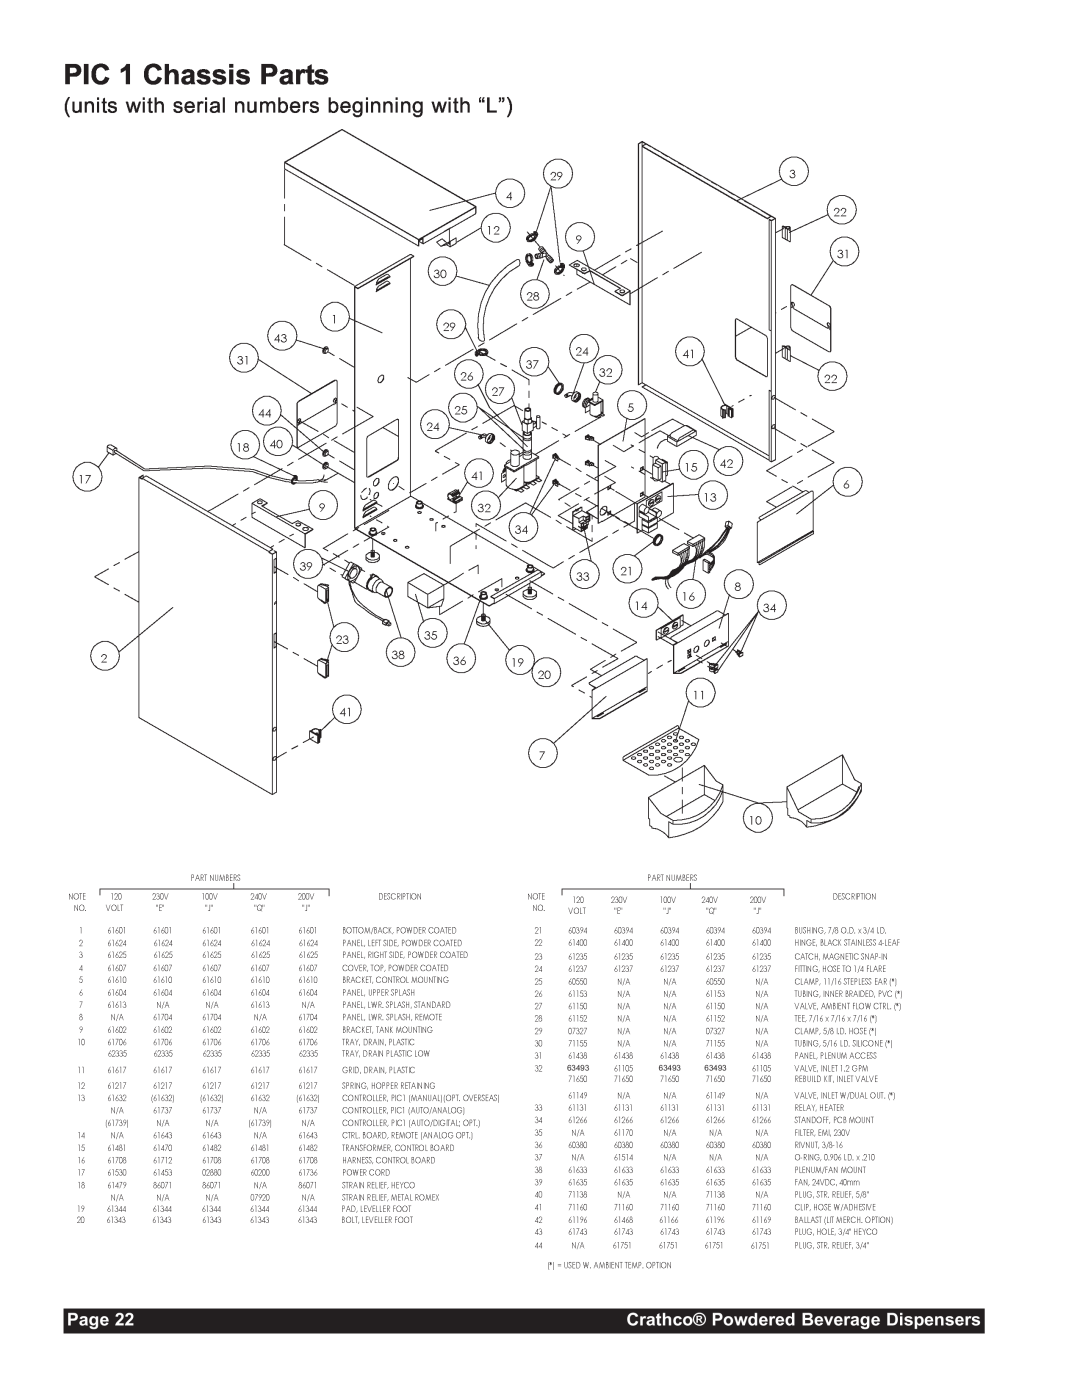 Grindmaster CC-302-20 service manual PIC 1 Chassis Parts, units with serial numbers beginning with “L”, Page, 63493 